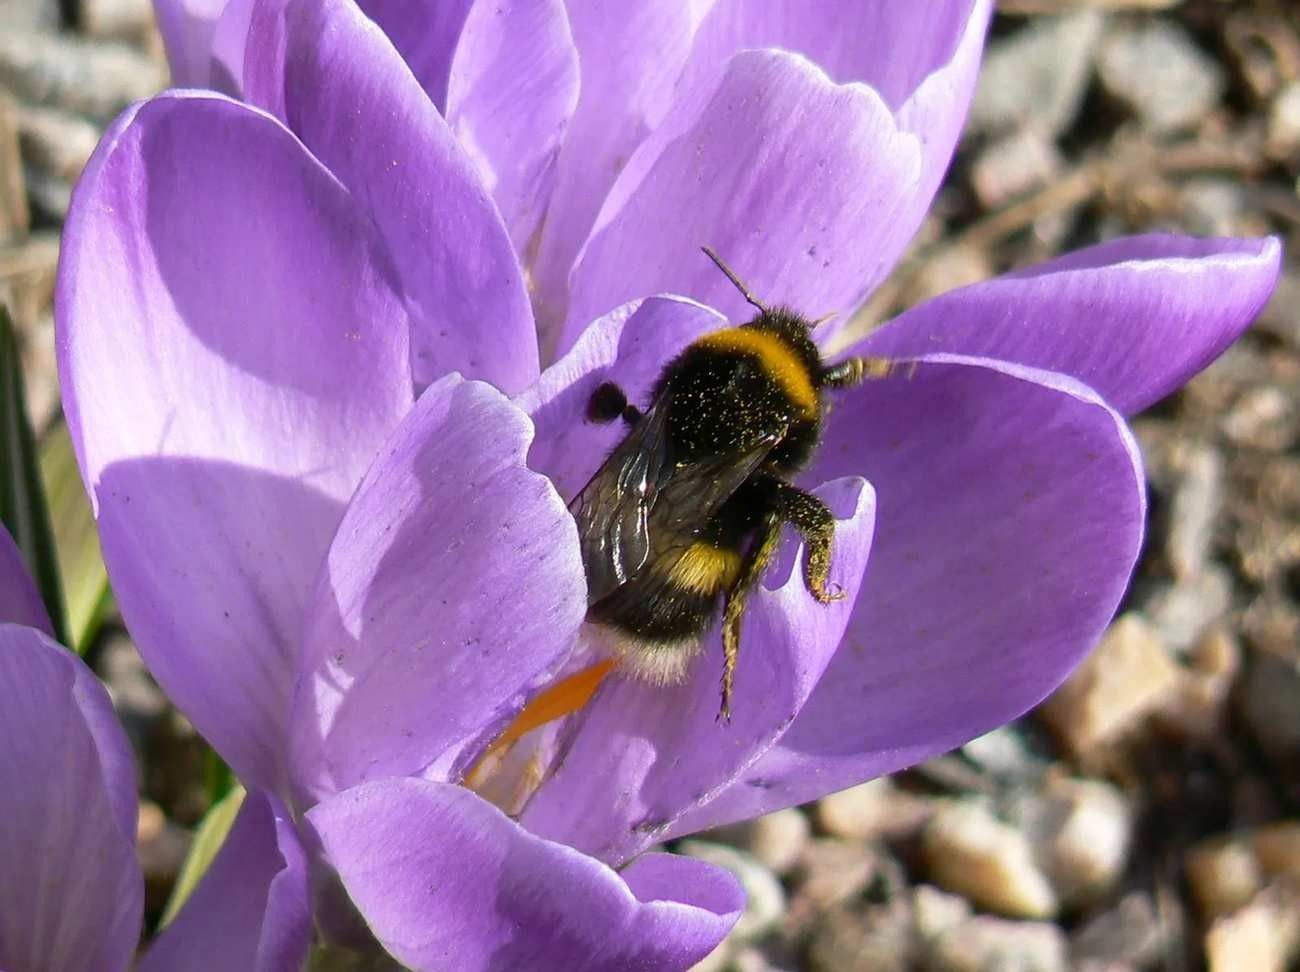 White-tailed bumblebees have a white tail.